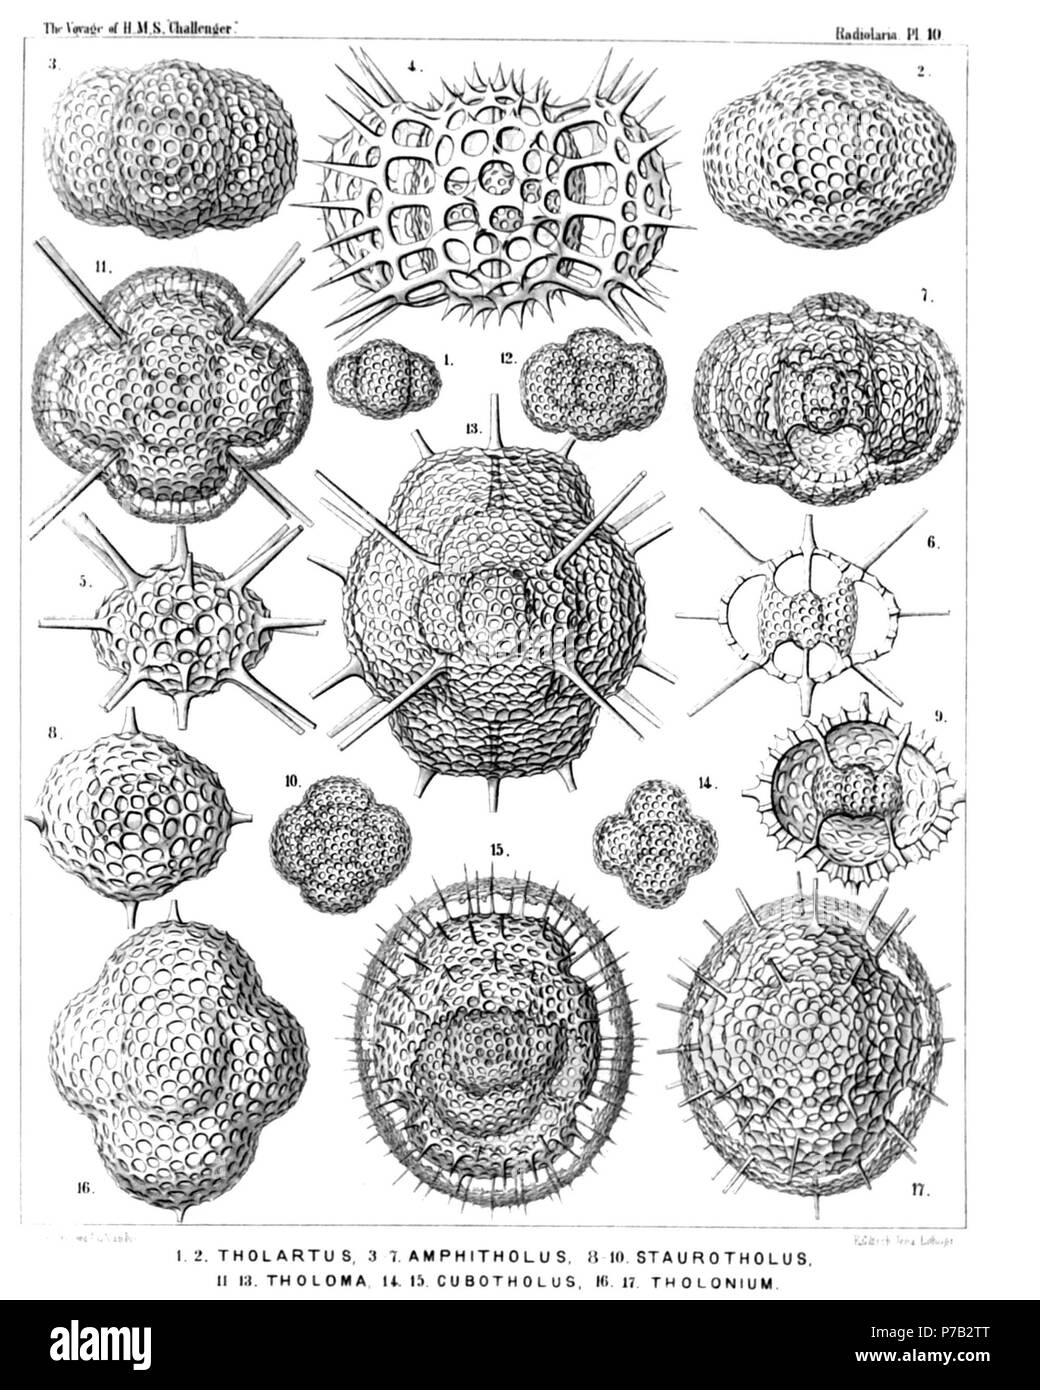 English: Illustration from Report on the Radiolaria collected by H.M.S. Challenger during the years 1873-1876. Part III. Original description follows:  Plate 10. Tholonida.  Diam.  Fig. 1. Tholartus tricolus, n. sp., × 200  Fig. 2. Tholodes cupula, n. sp., × 500  Fig. 3. Amphitholus artiscus, n. sp., × 400  Fig. 4. Amphitholus panicium, n. sp., × 500  Fig. 5. Amphitholus acanthometra, n. sp., × 300  Fig. 6. Amphitholus acanthometra, n. sp., × 300  Frontal section of the shell.  Fig. 7. Amphitholonium tricolonium, n. sp., × 300  Fig. 8. Staurotholus tetrastylus, n. sp., × 300  Fig. 9. Staurotho Stock Photo